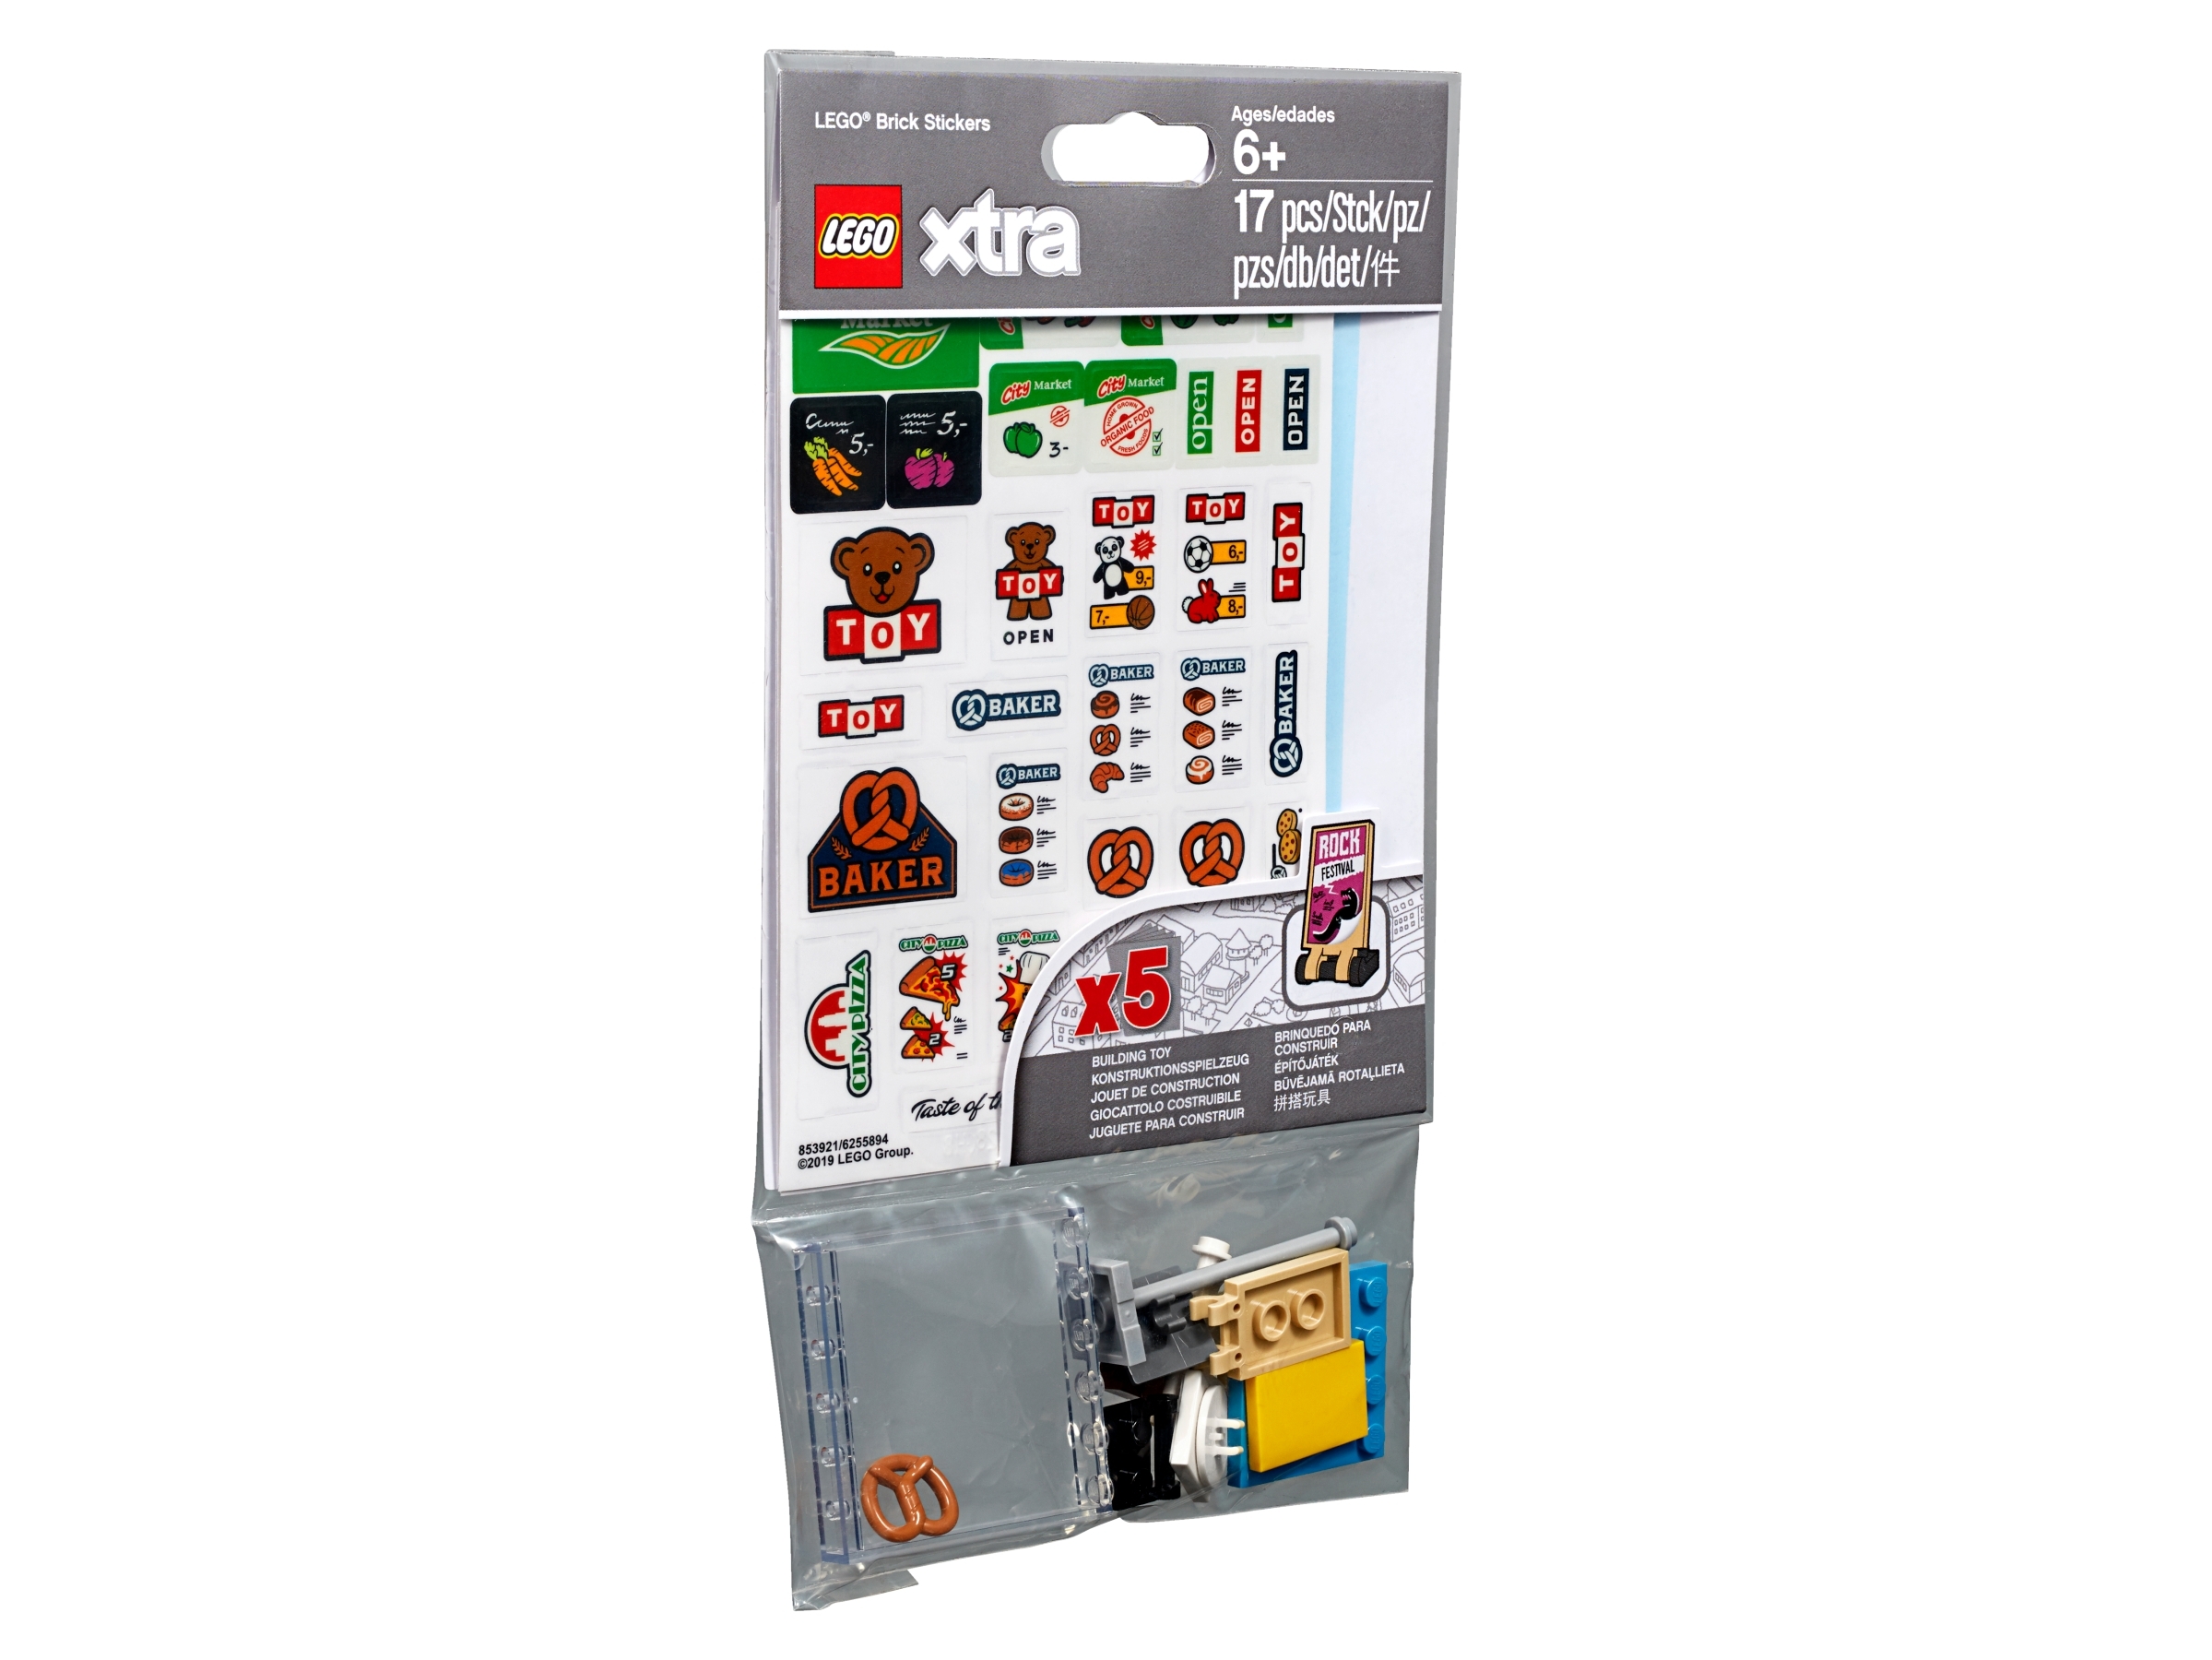 Lego Sticker Sets Only Many Stickers Available Star Wars City Town More You Pick